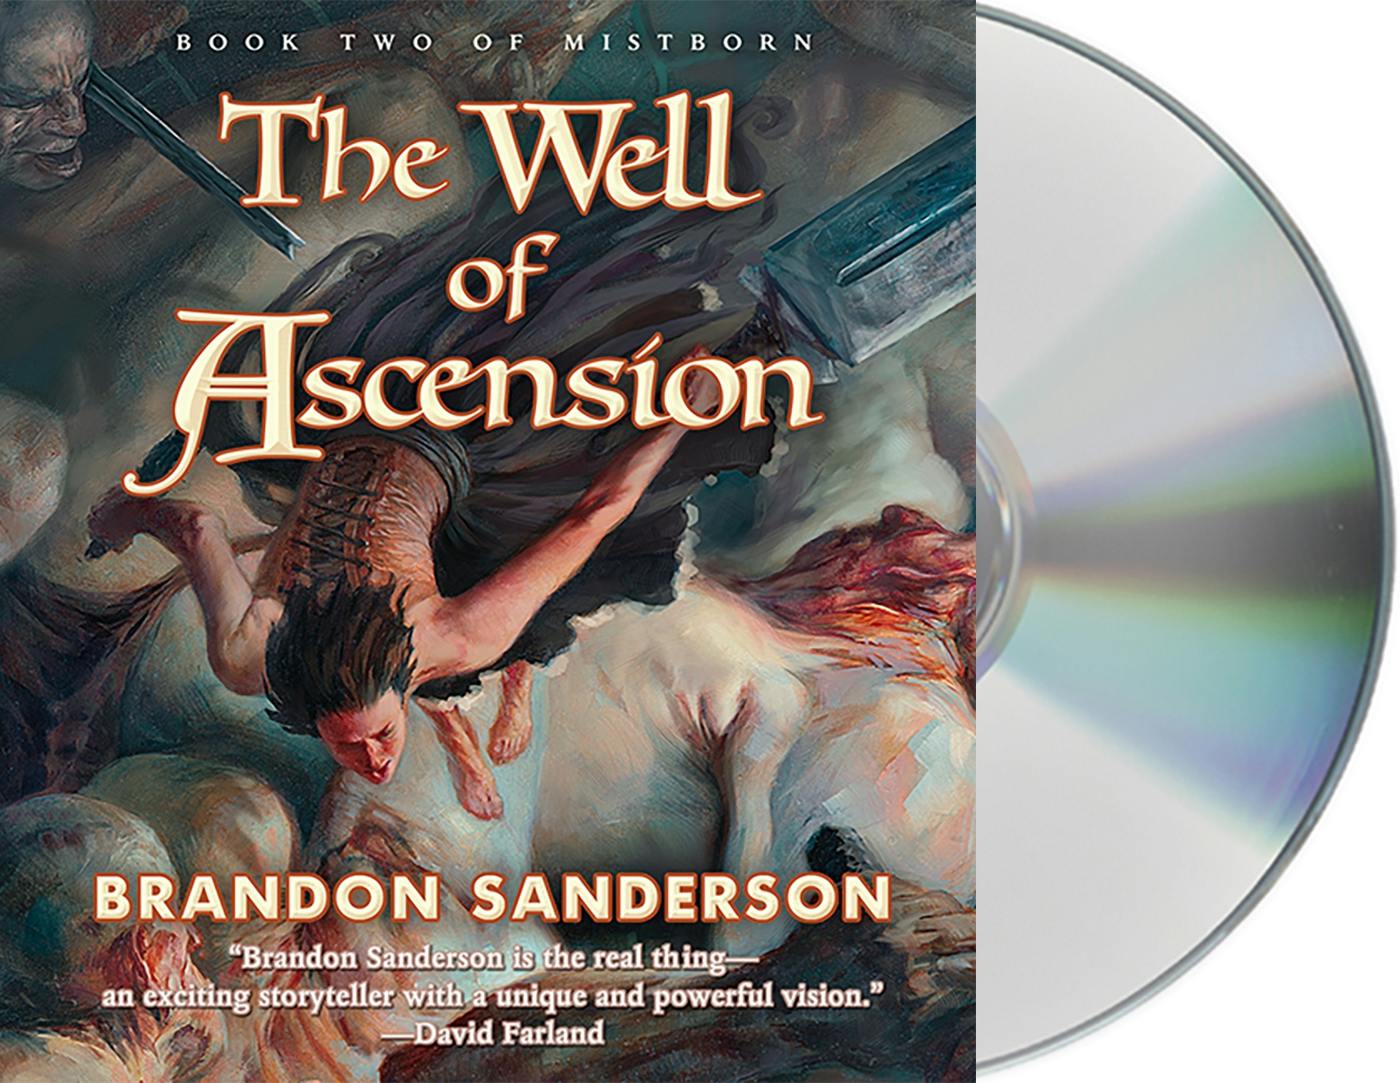 Let's go!! The highly requested Brandon Sanderson Cosmere reading